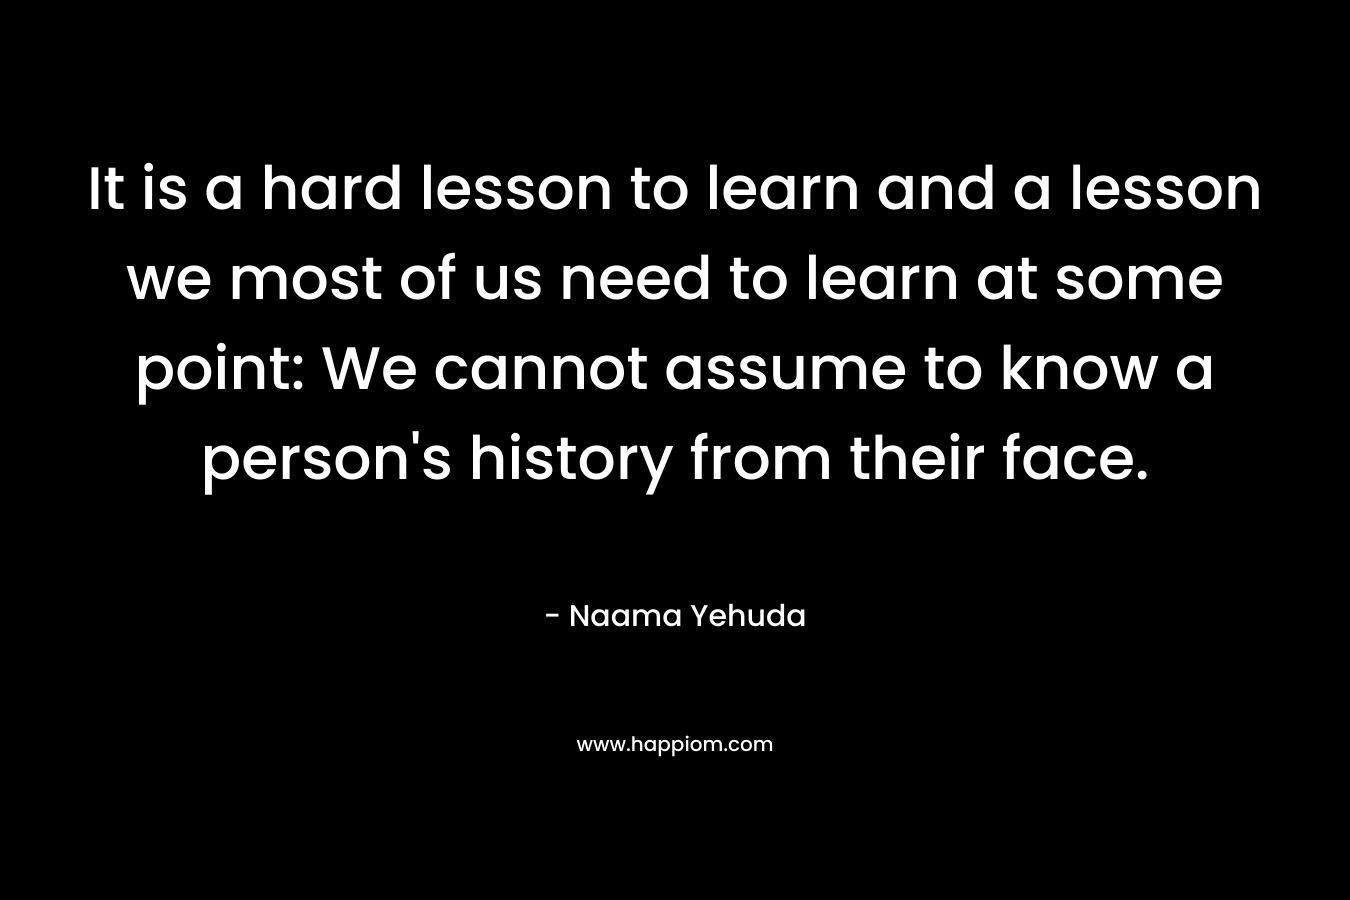 It is a hard lesson to learn and a lesson we most of us need to learn at some point: We cannot assume to know a person's history from their face.